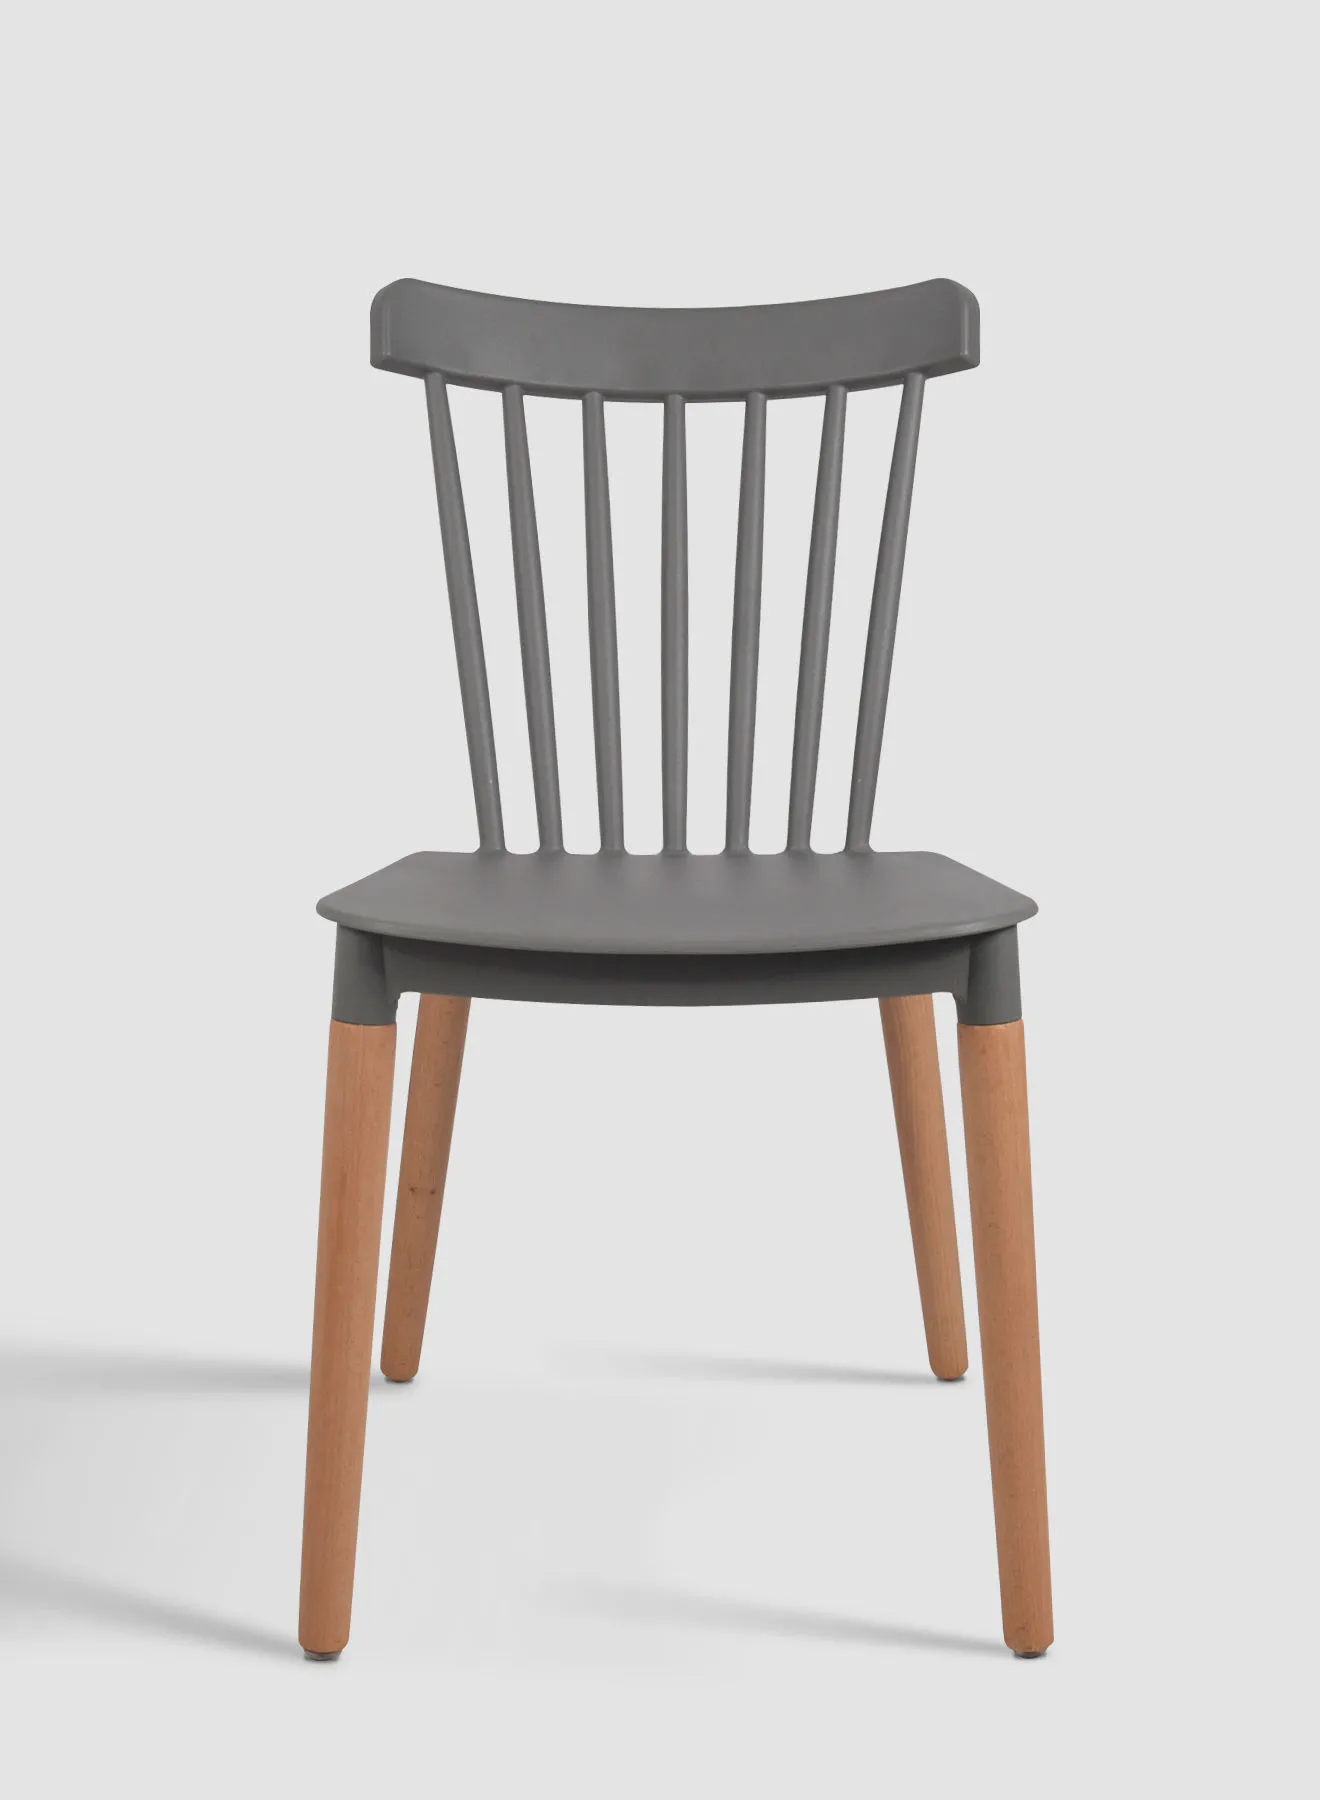 Switch Dining Chair In Grey Plastic Chair Size 51.5 X 44.5 X 84